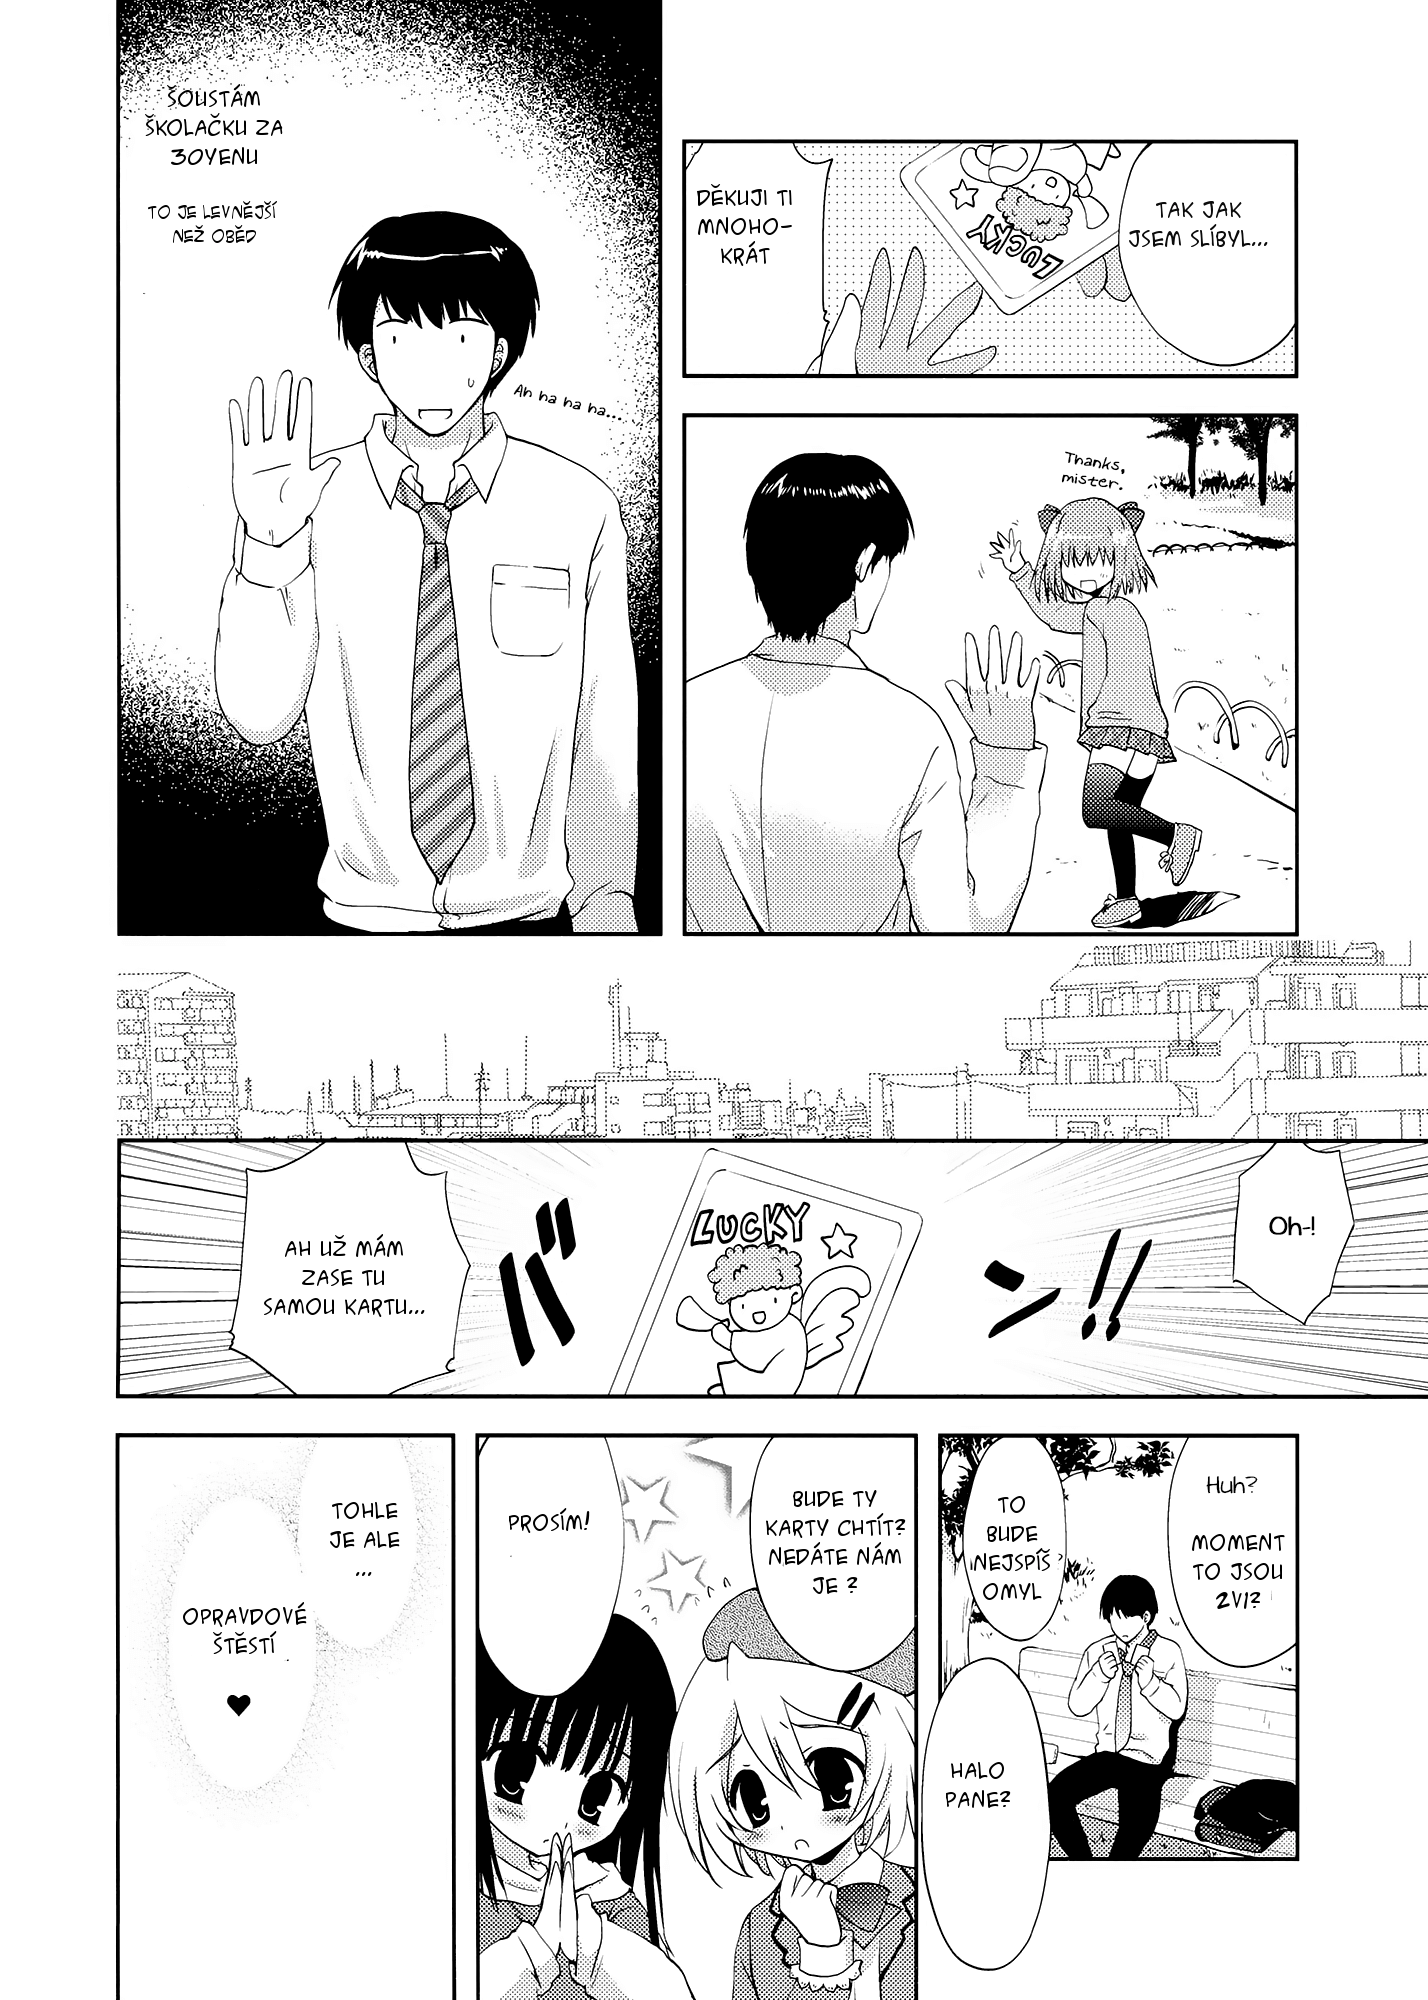 Doki The Story Of How I Did It With An Elementary Schooler For Only 30 Yen Original Page 08